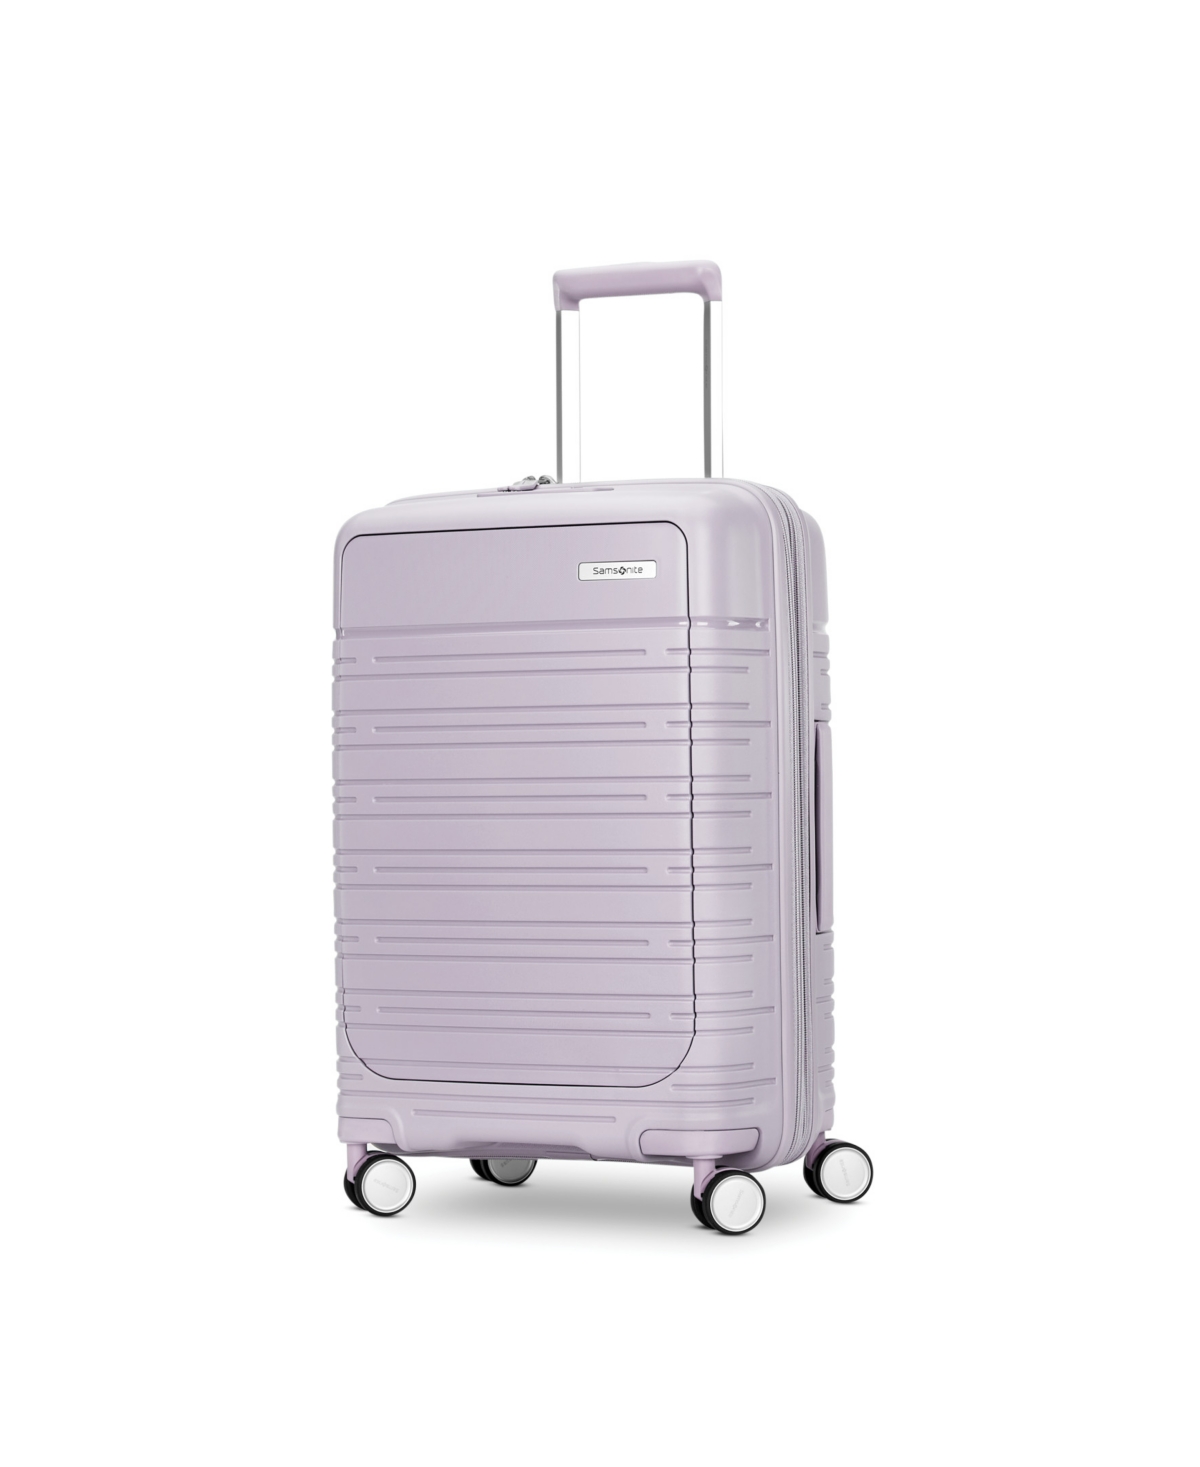 Samsonite Elevation Plus Carry On Spinner In Soft Lilac